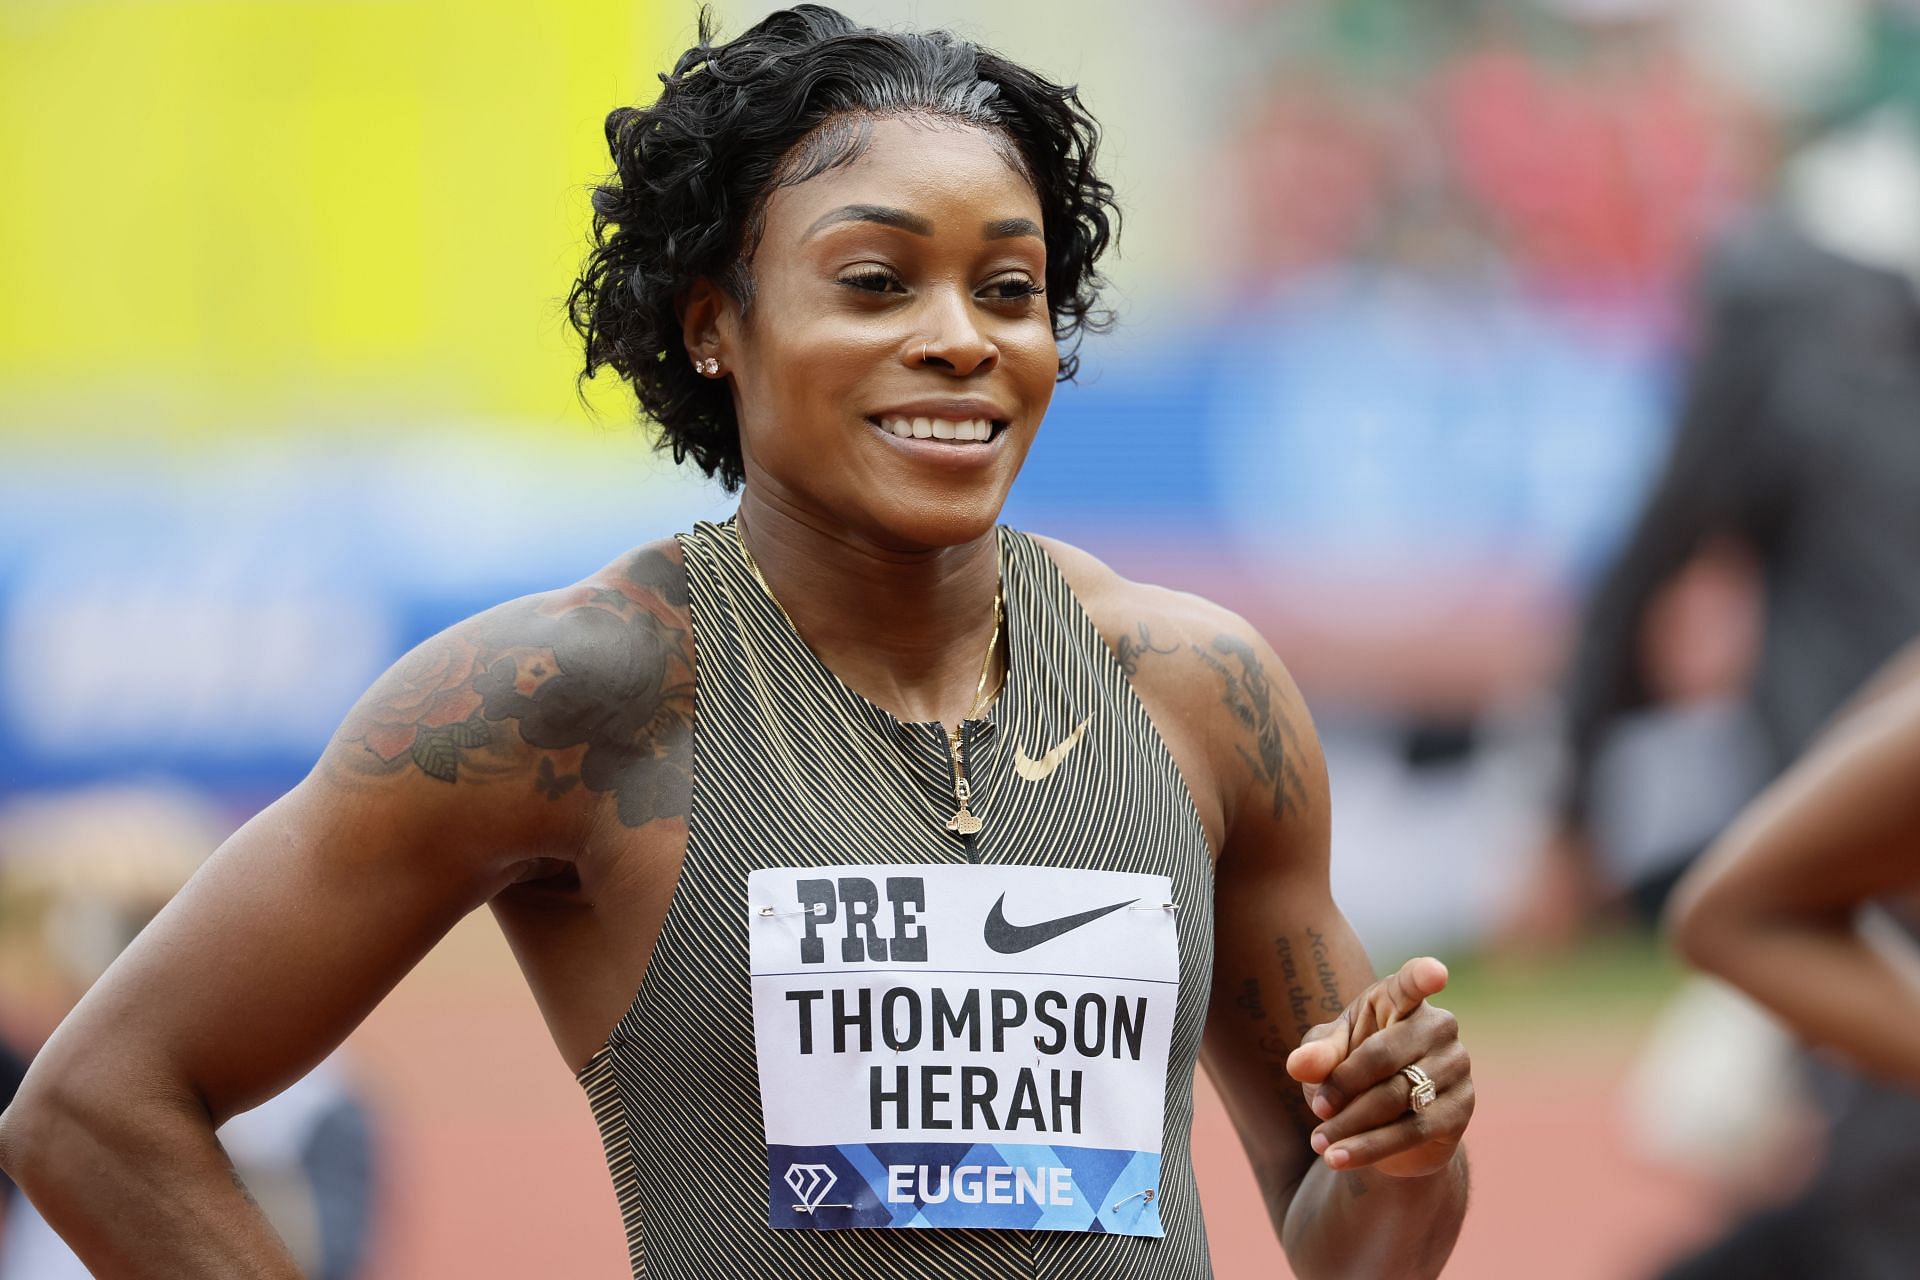 The Prefontaine Classic 2022: Elaine Thompson-Herah wins in style